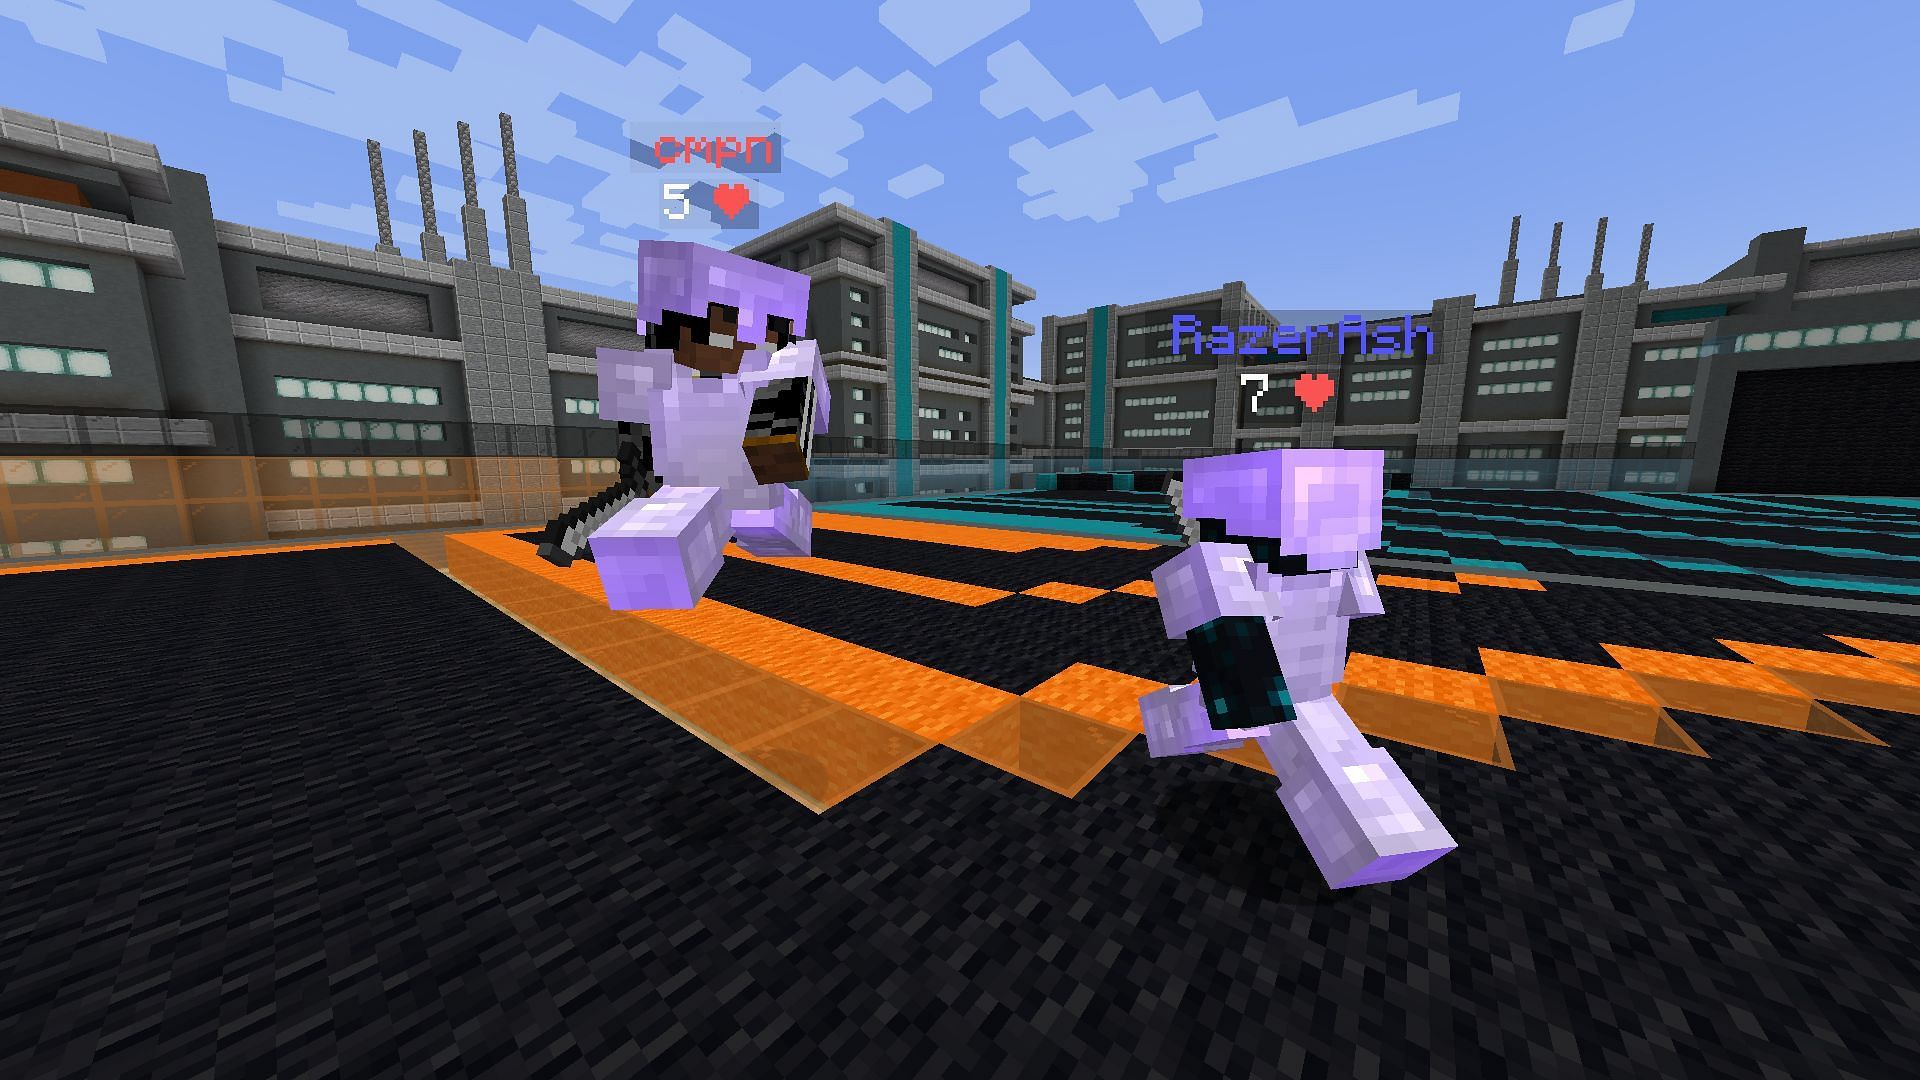 PvP is one of the most famous game modes in Minecraft servers (Image via Mojang)